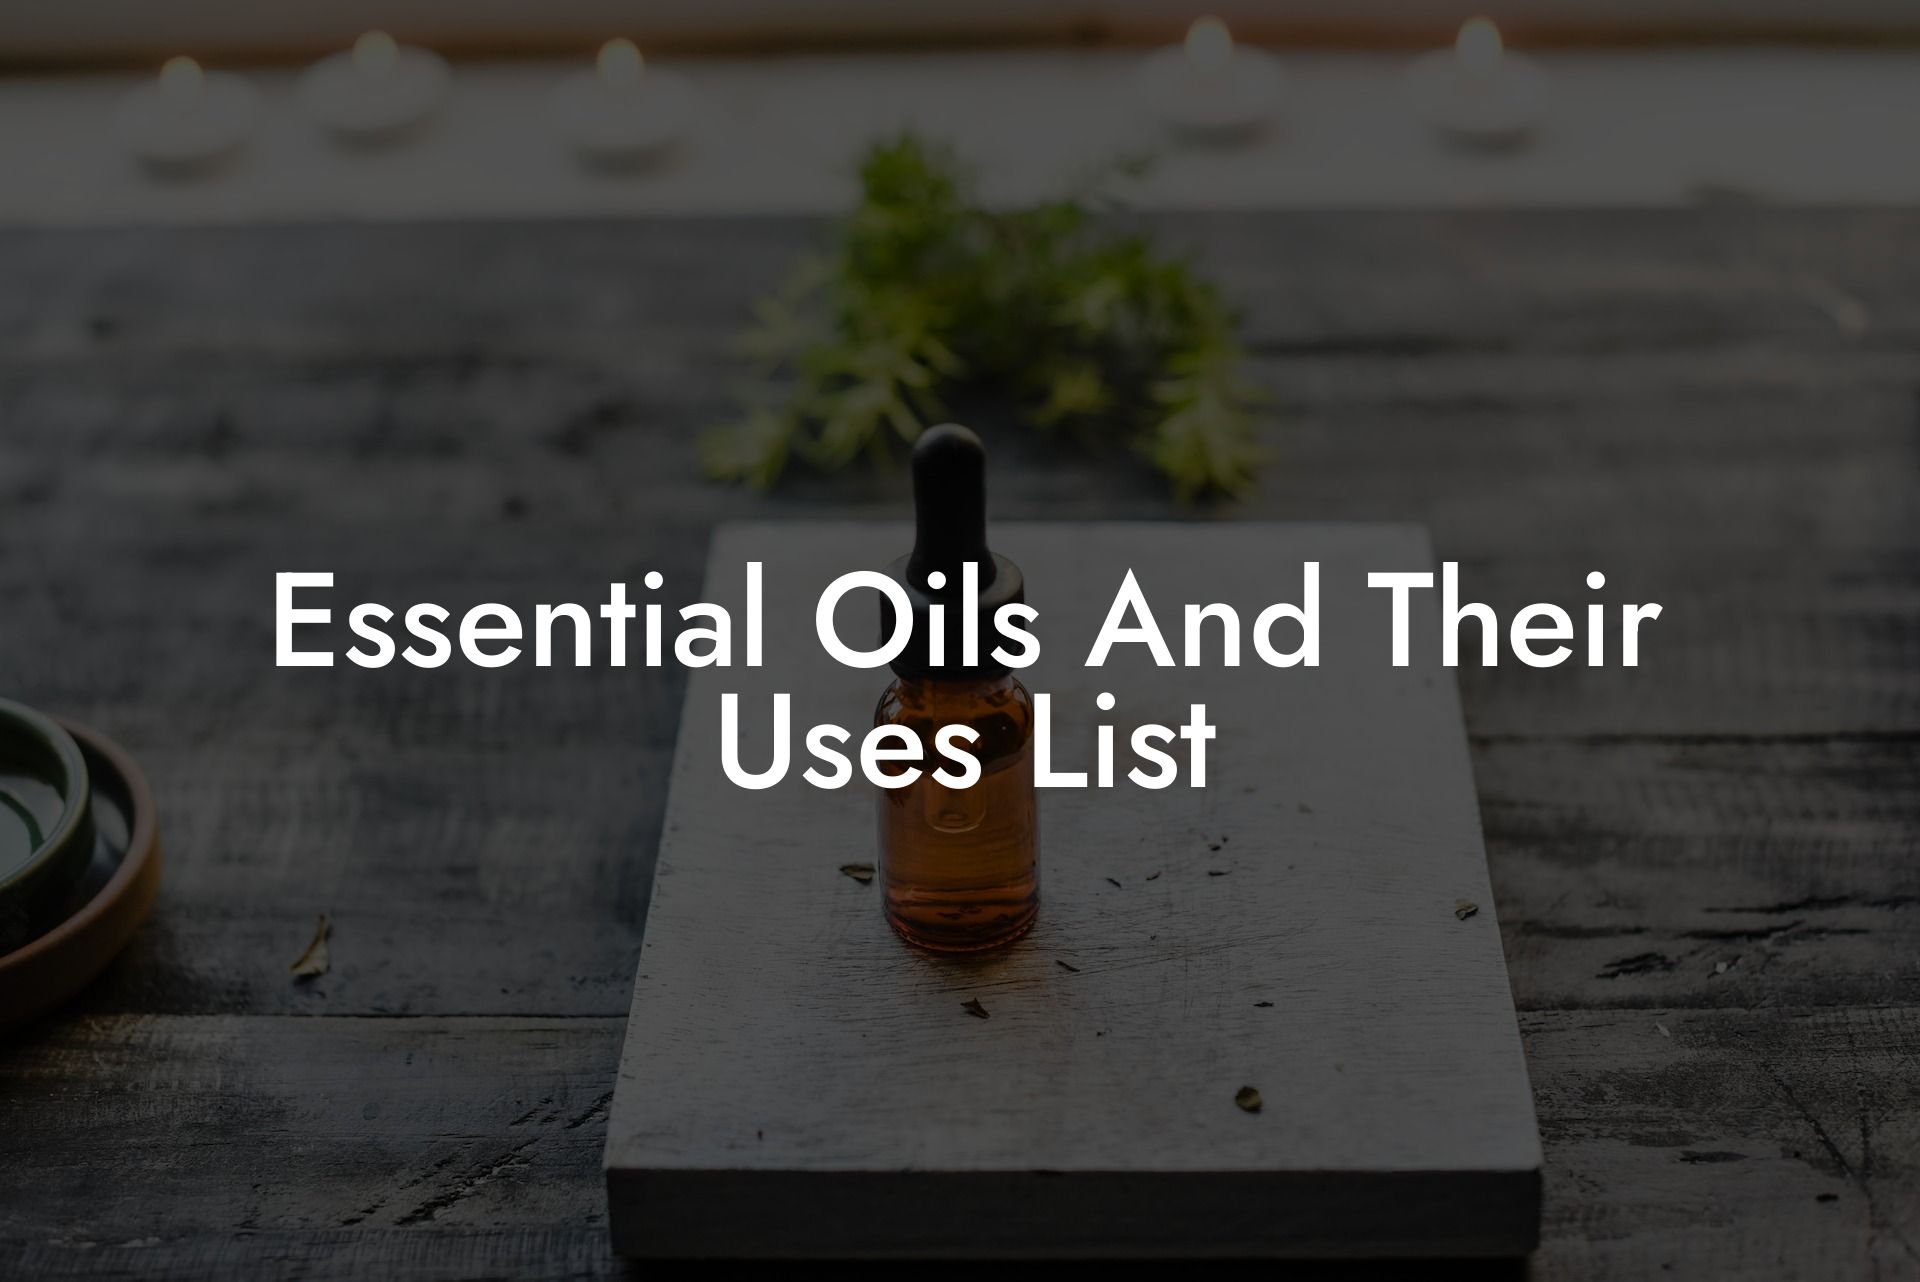 Essential Oils And Their Uses List